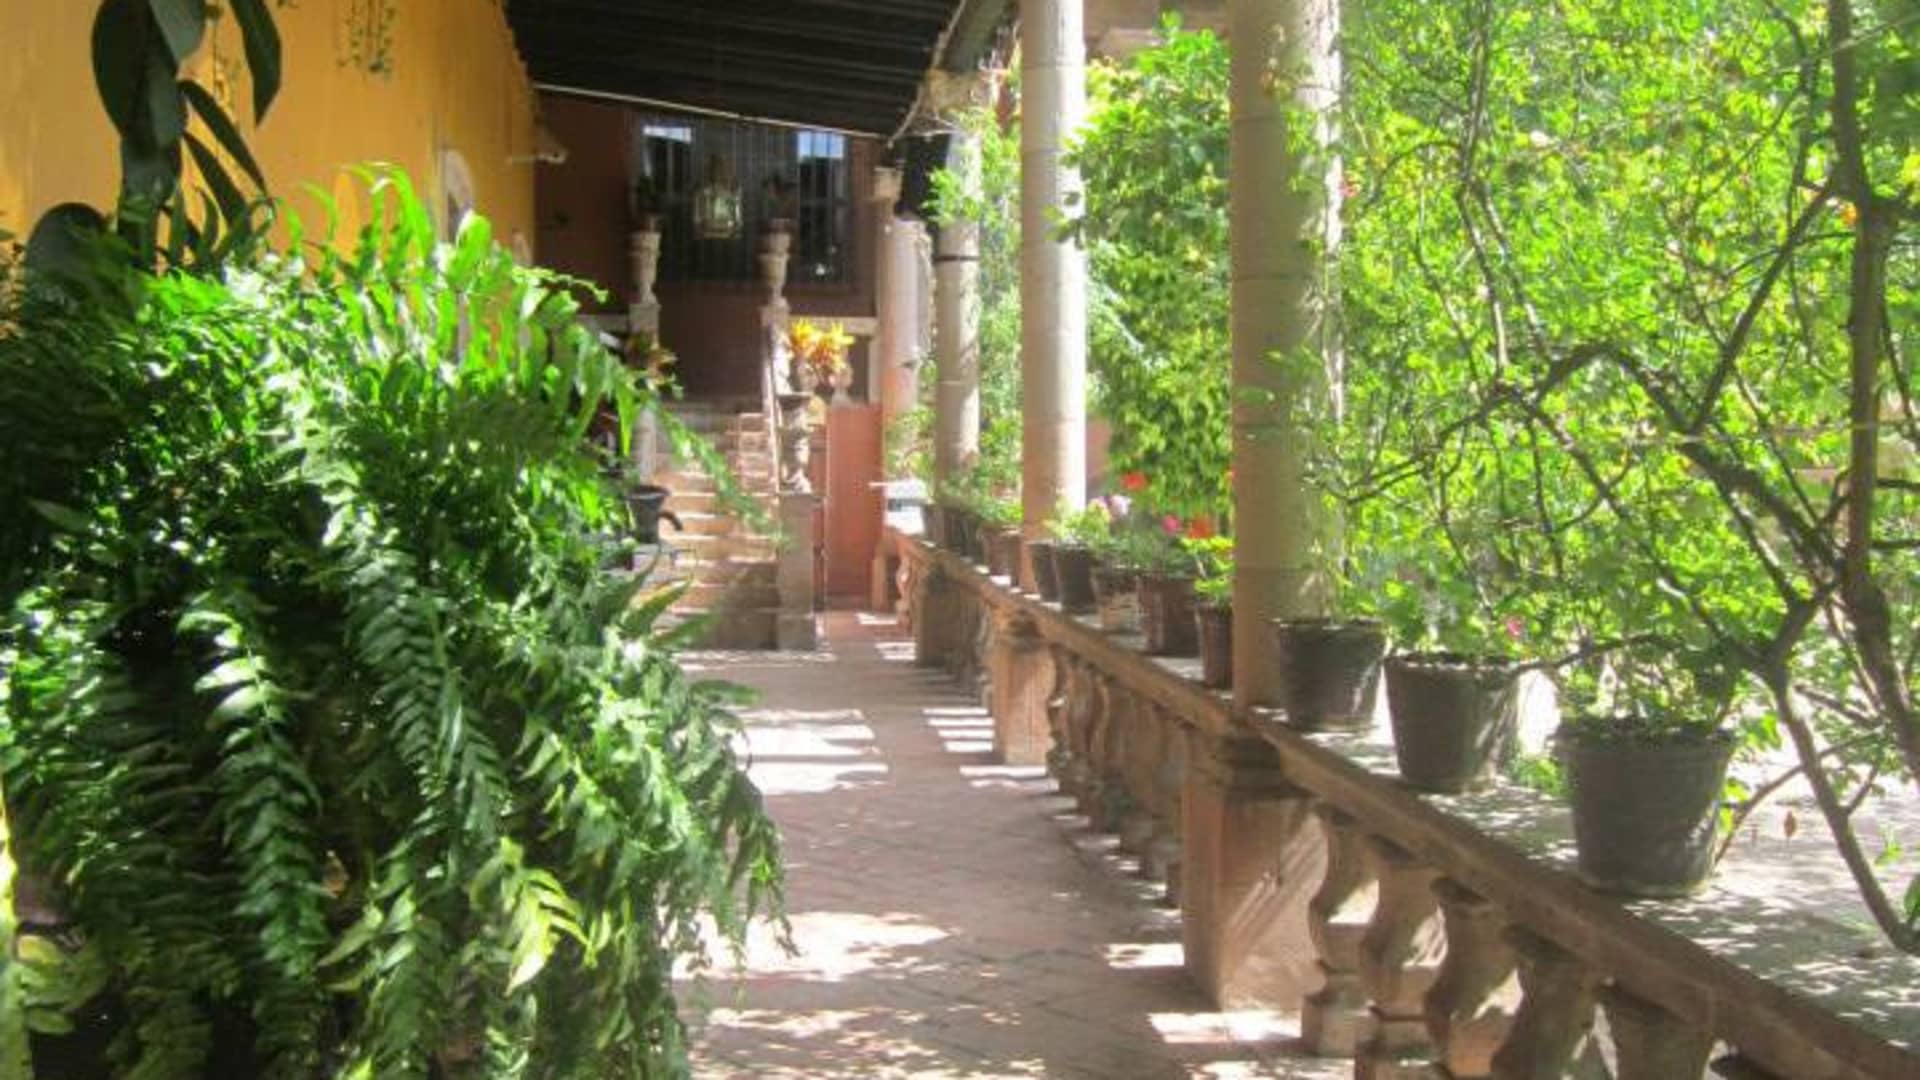 Tranquil courtyards, patios and balconies beckon from inside beautiful colonial-era homes and haciendas in Mexico's San Miguel de Allende, providing a respite from the hustle and bustle of the city.